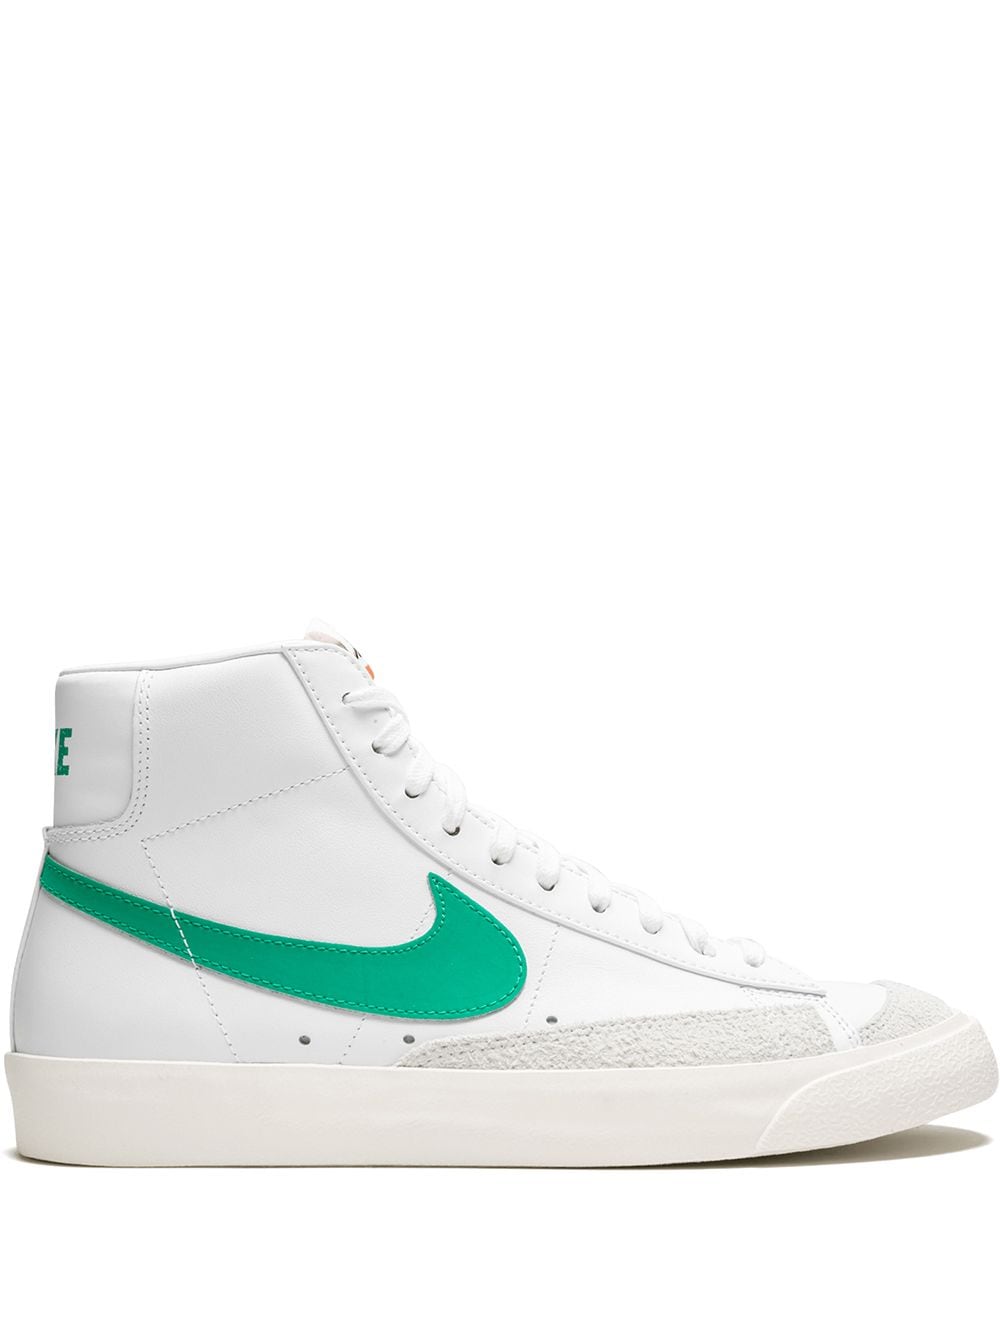 Nike Blazer Mid '77 Vintage Sneakers In White And Green In White/green/orange